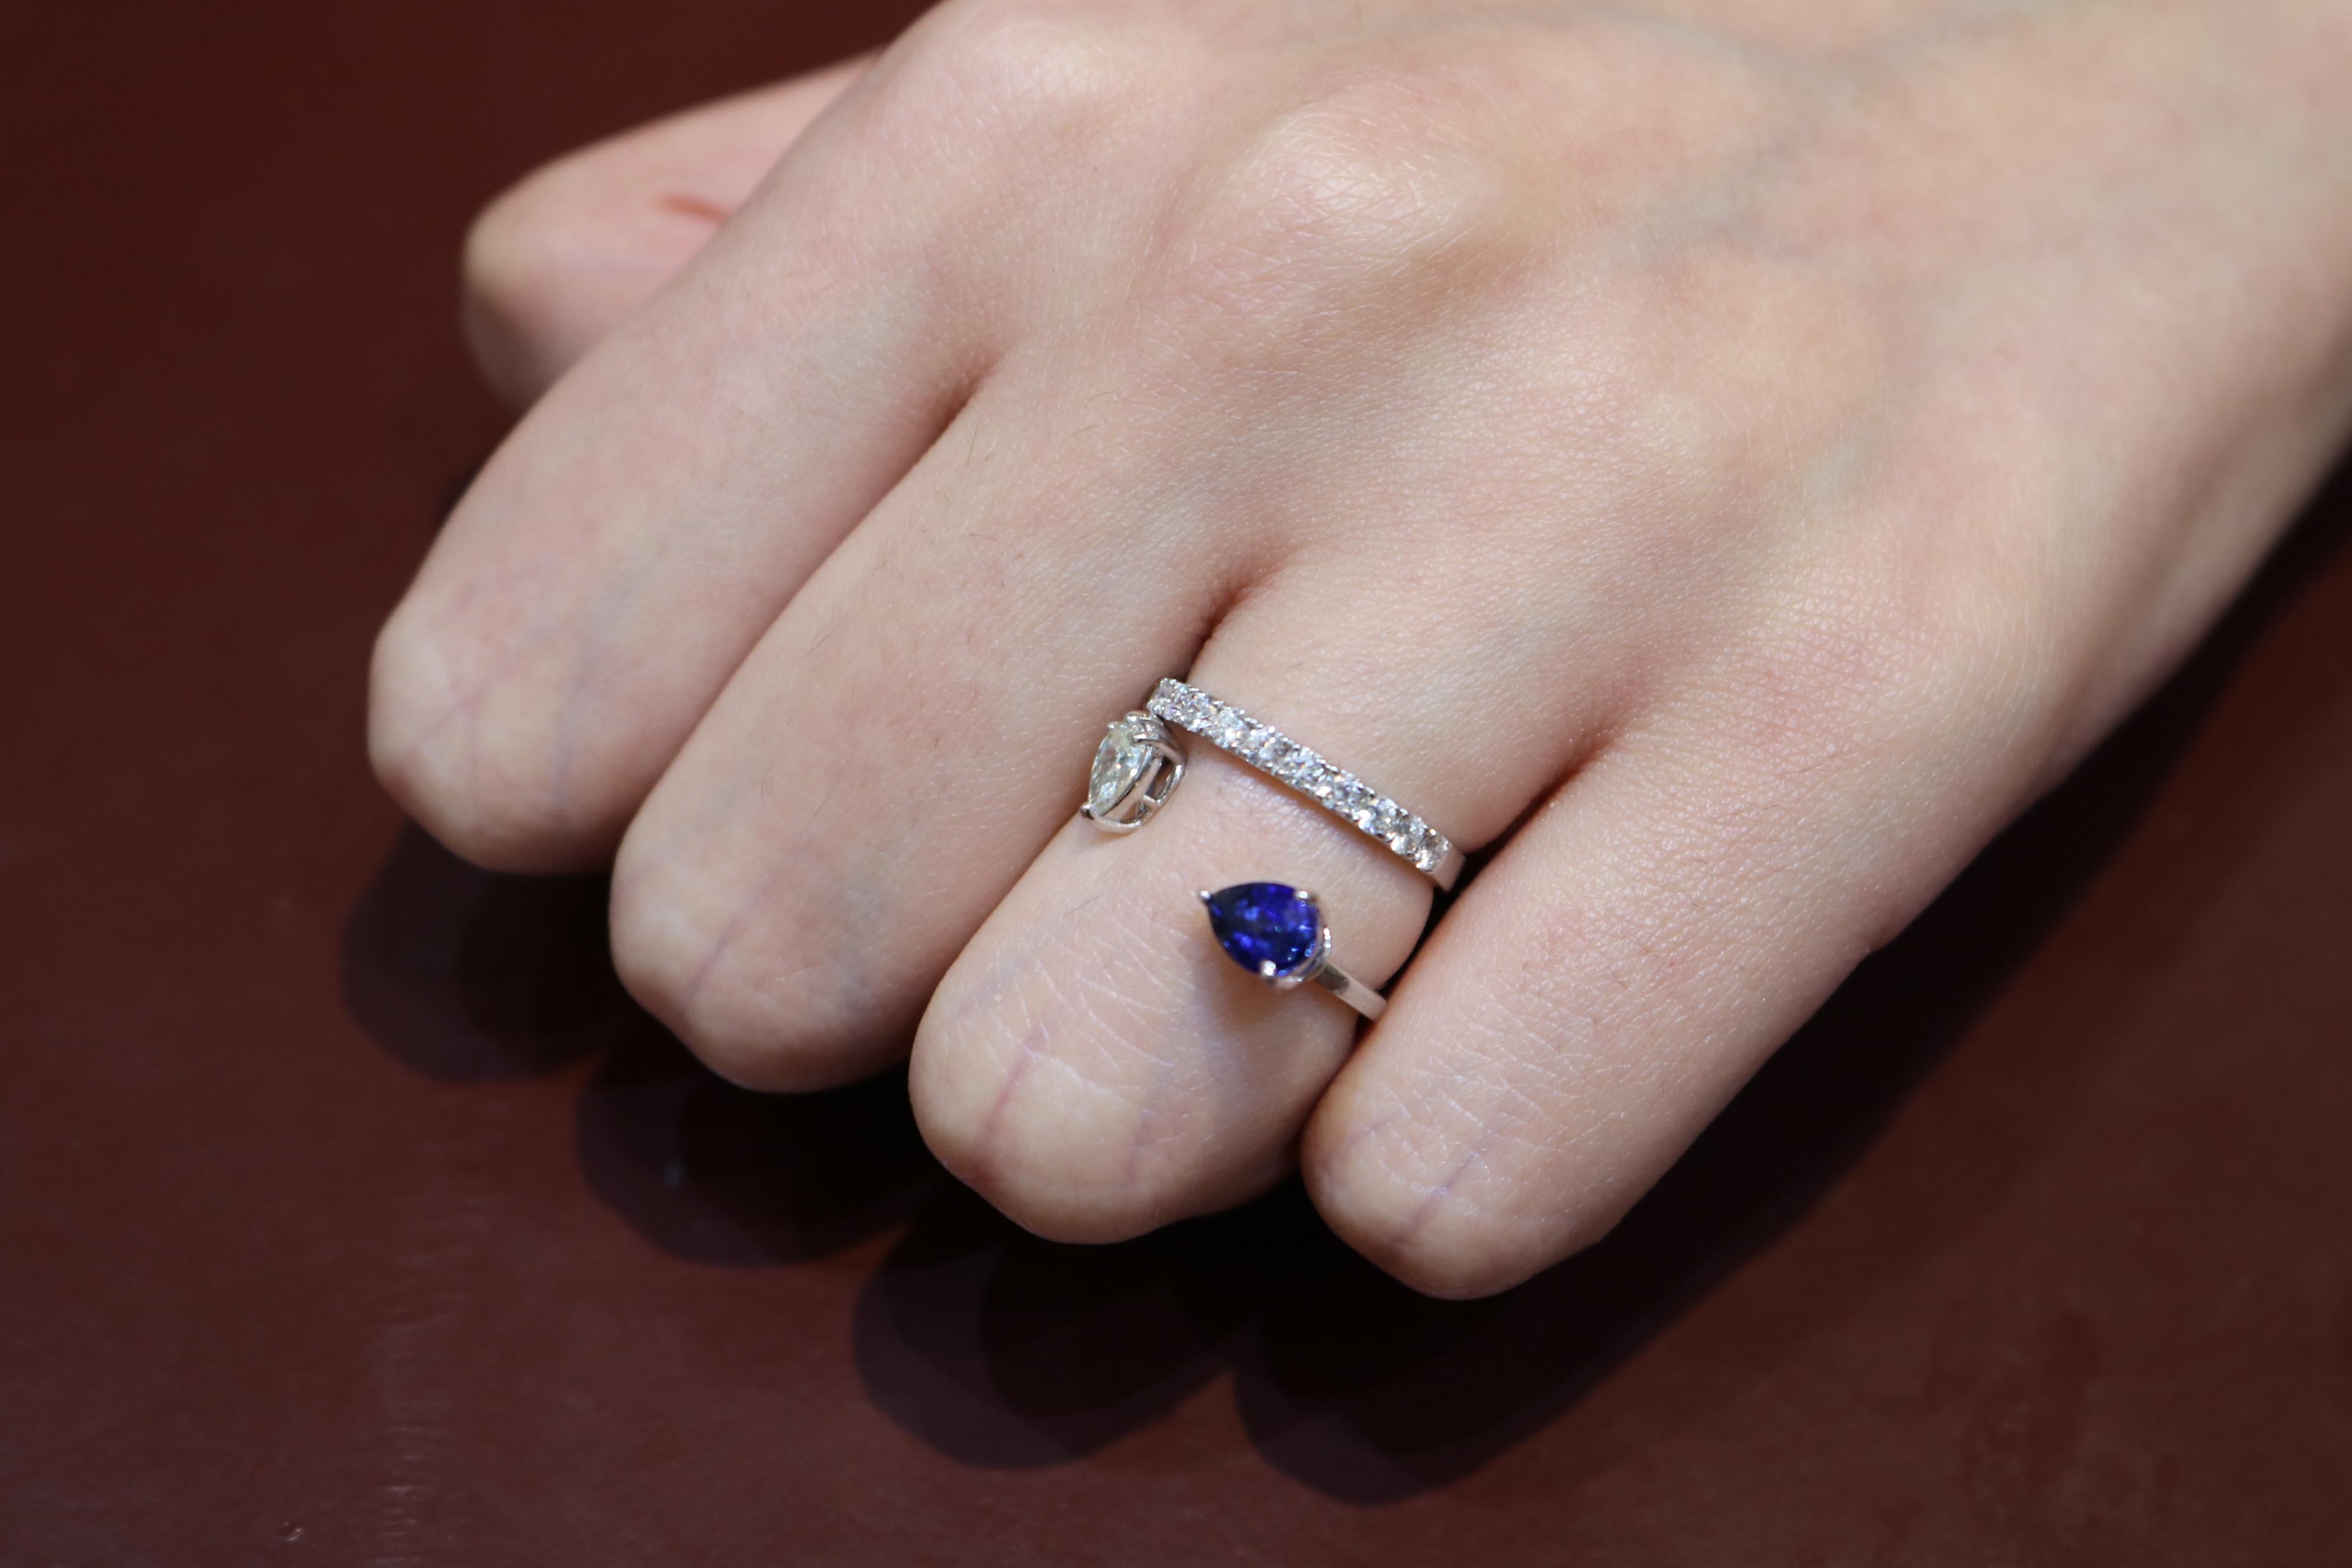 Amwaj 18 Karat White Gold Ring with Pear Cut Sapphire and Multi-Cut Diamonds In New Condition For Sale In Abu Dhabi, Abu Dhabi